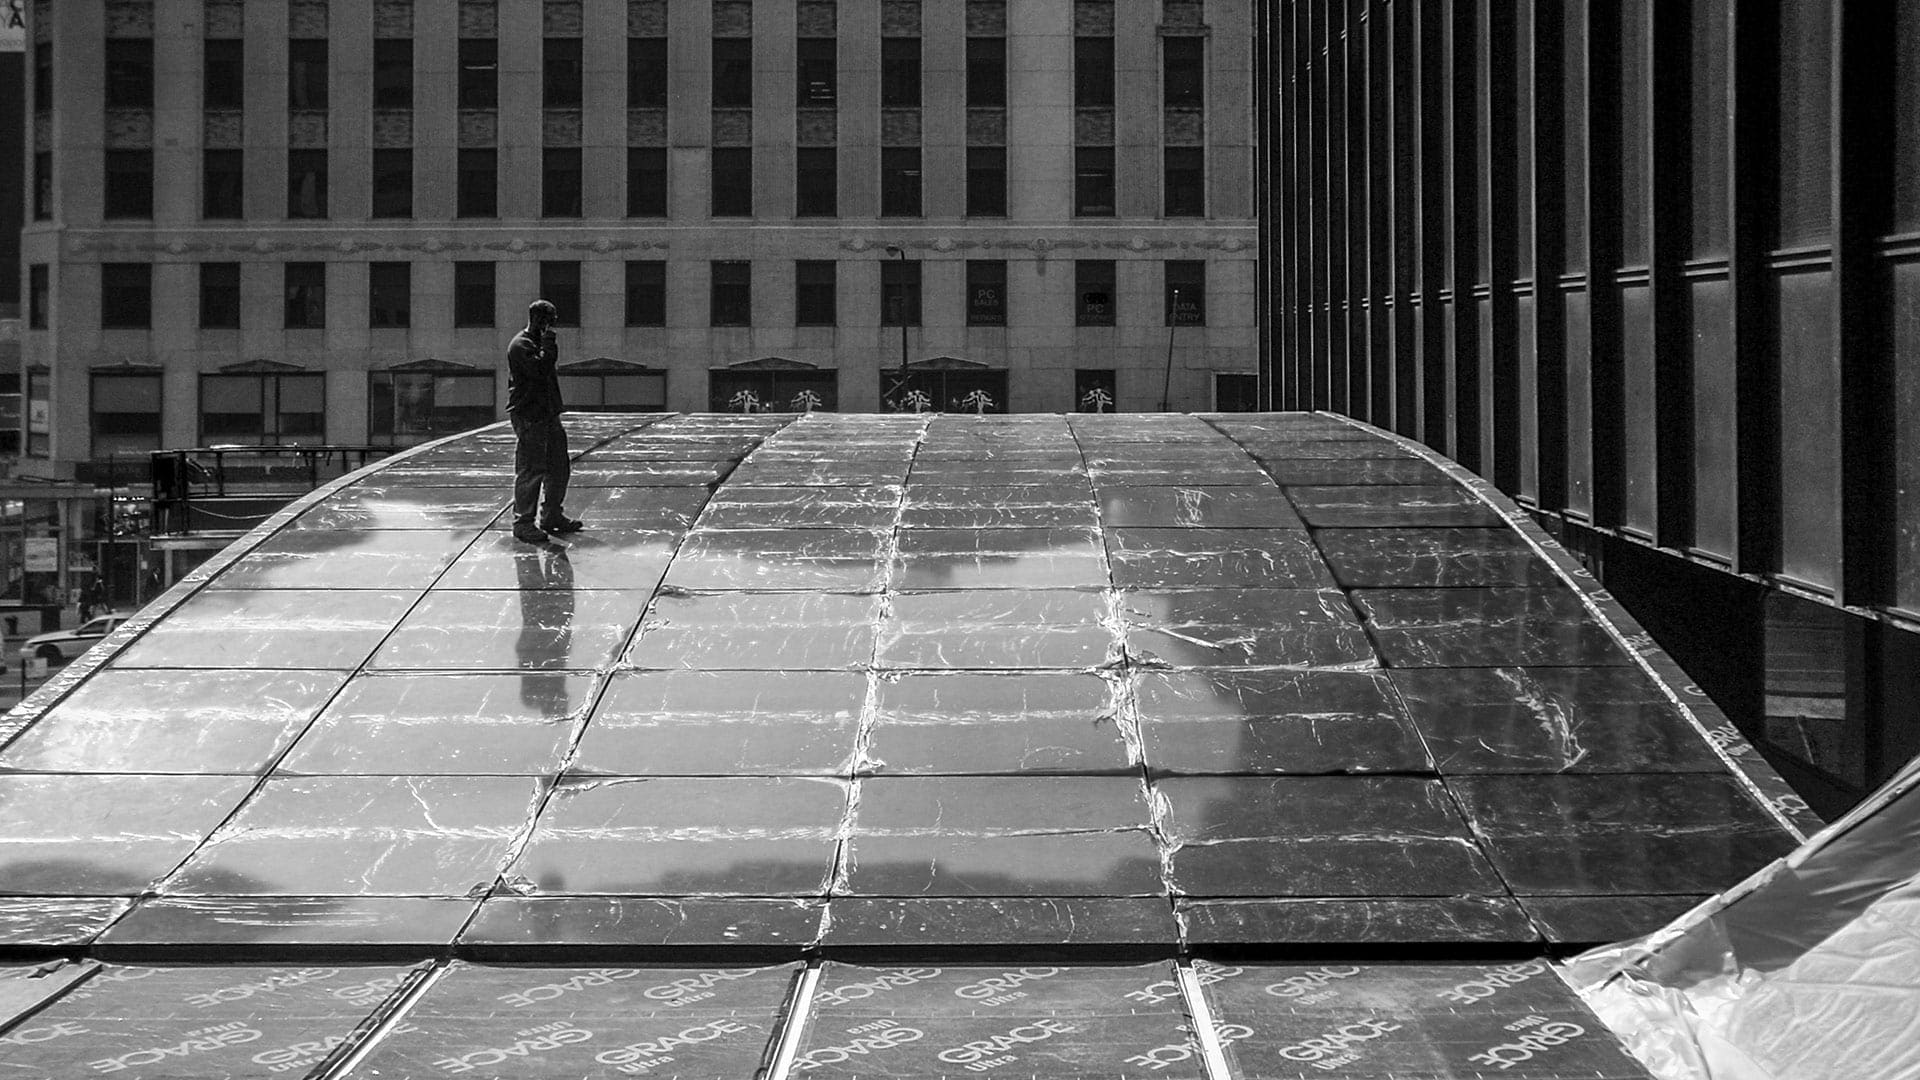 Construction photo shows a man standing on the top of the Michigan Avenue Plaza awning in Chicago.